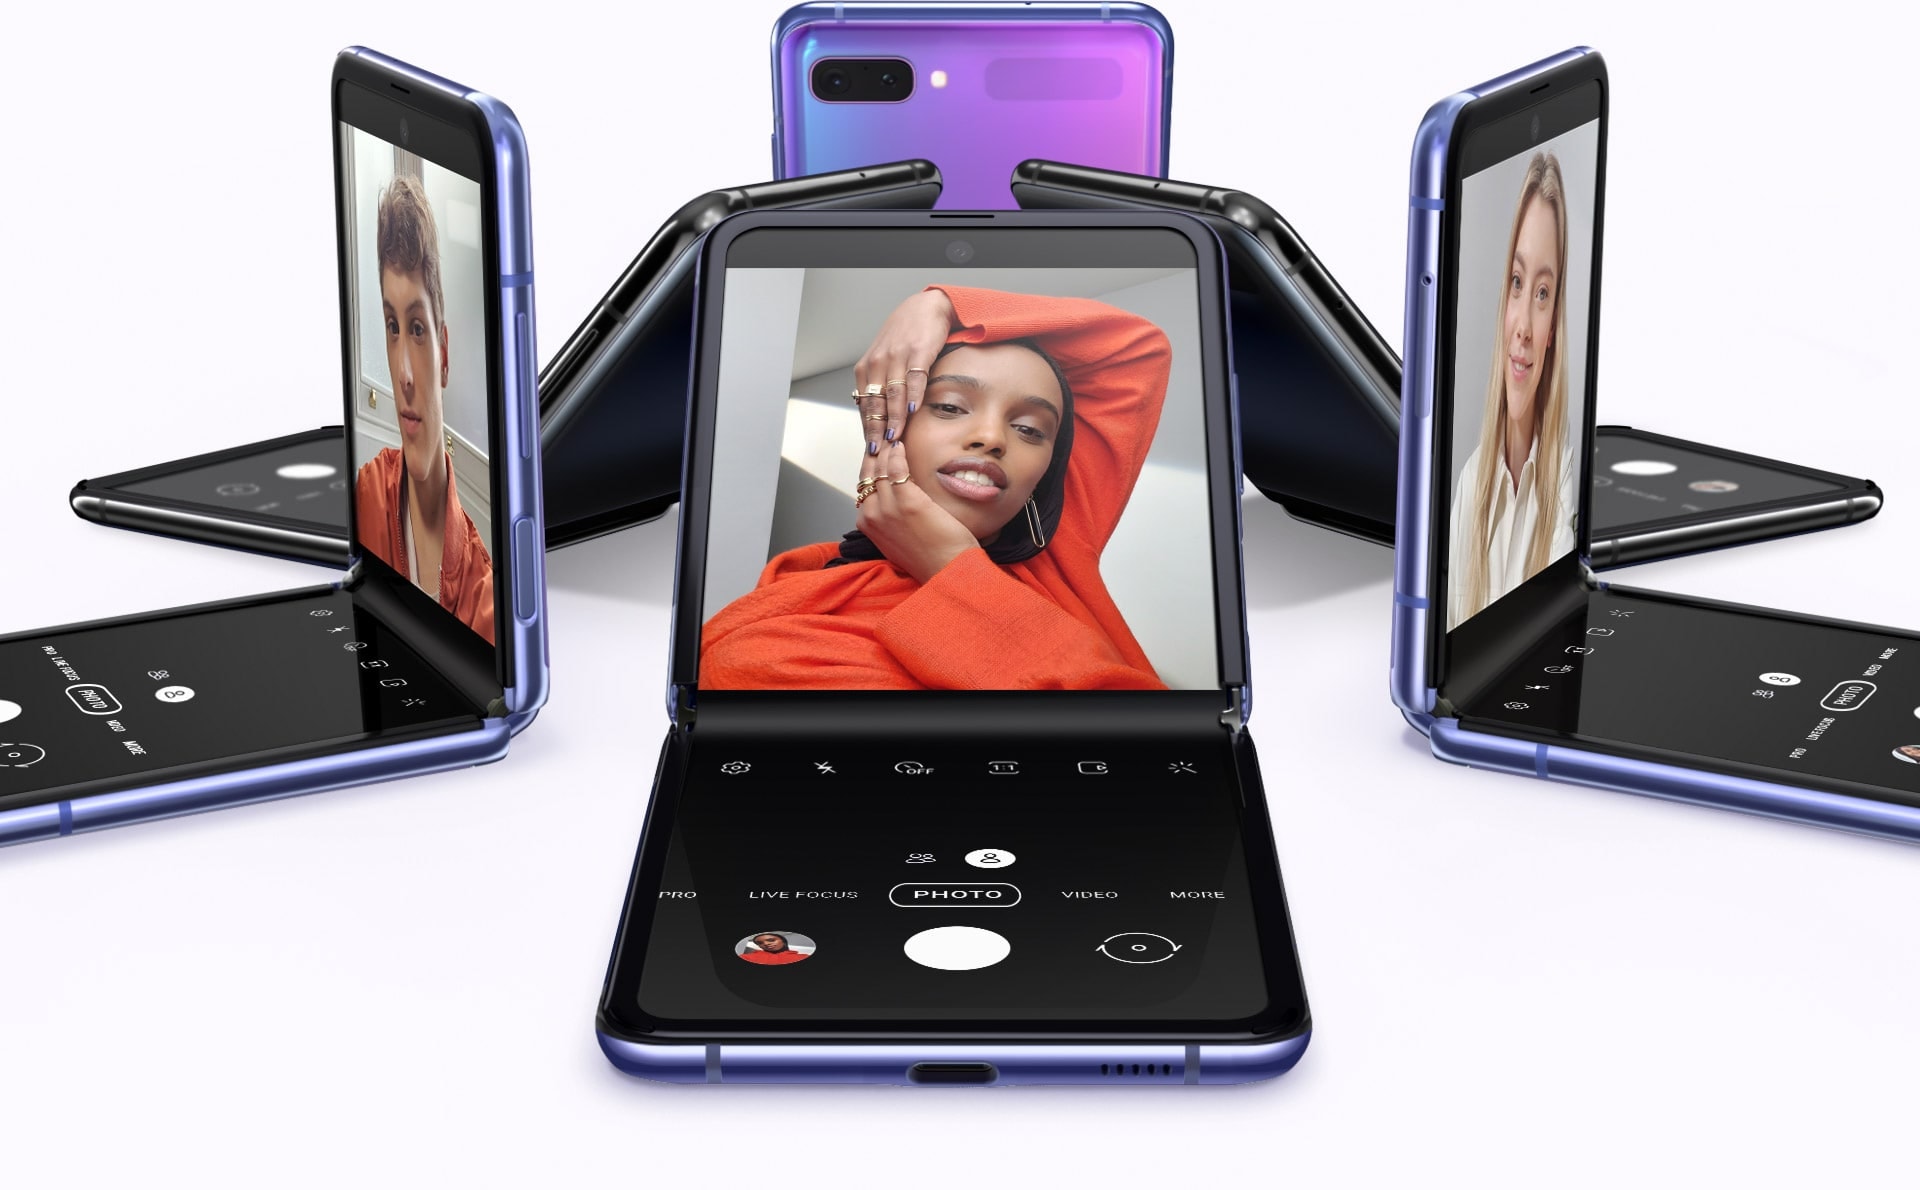 Six Galaxy Z Flip phones in Mirror Purple and Mirror Black in a circle at various angles. One has a selfie of a man, another has a selfie of a woman, and another has a different selfie of a woman on screen